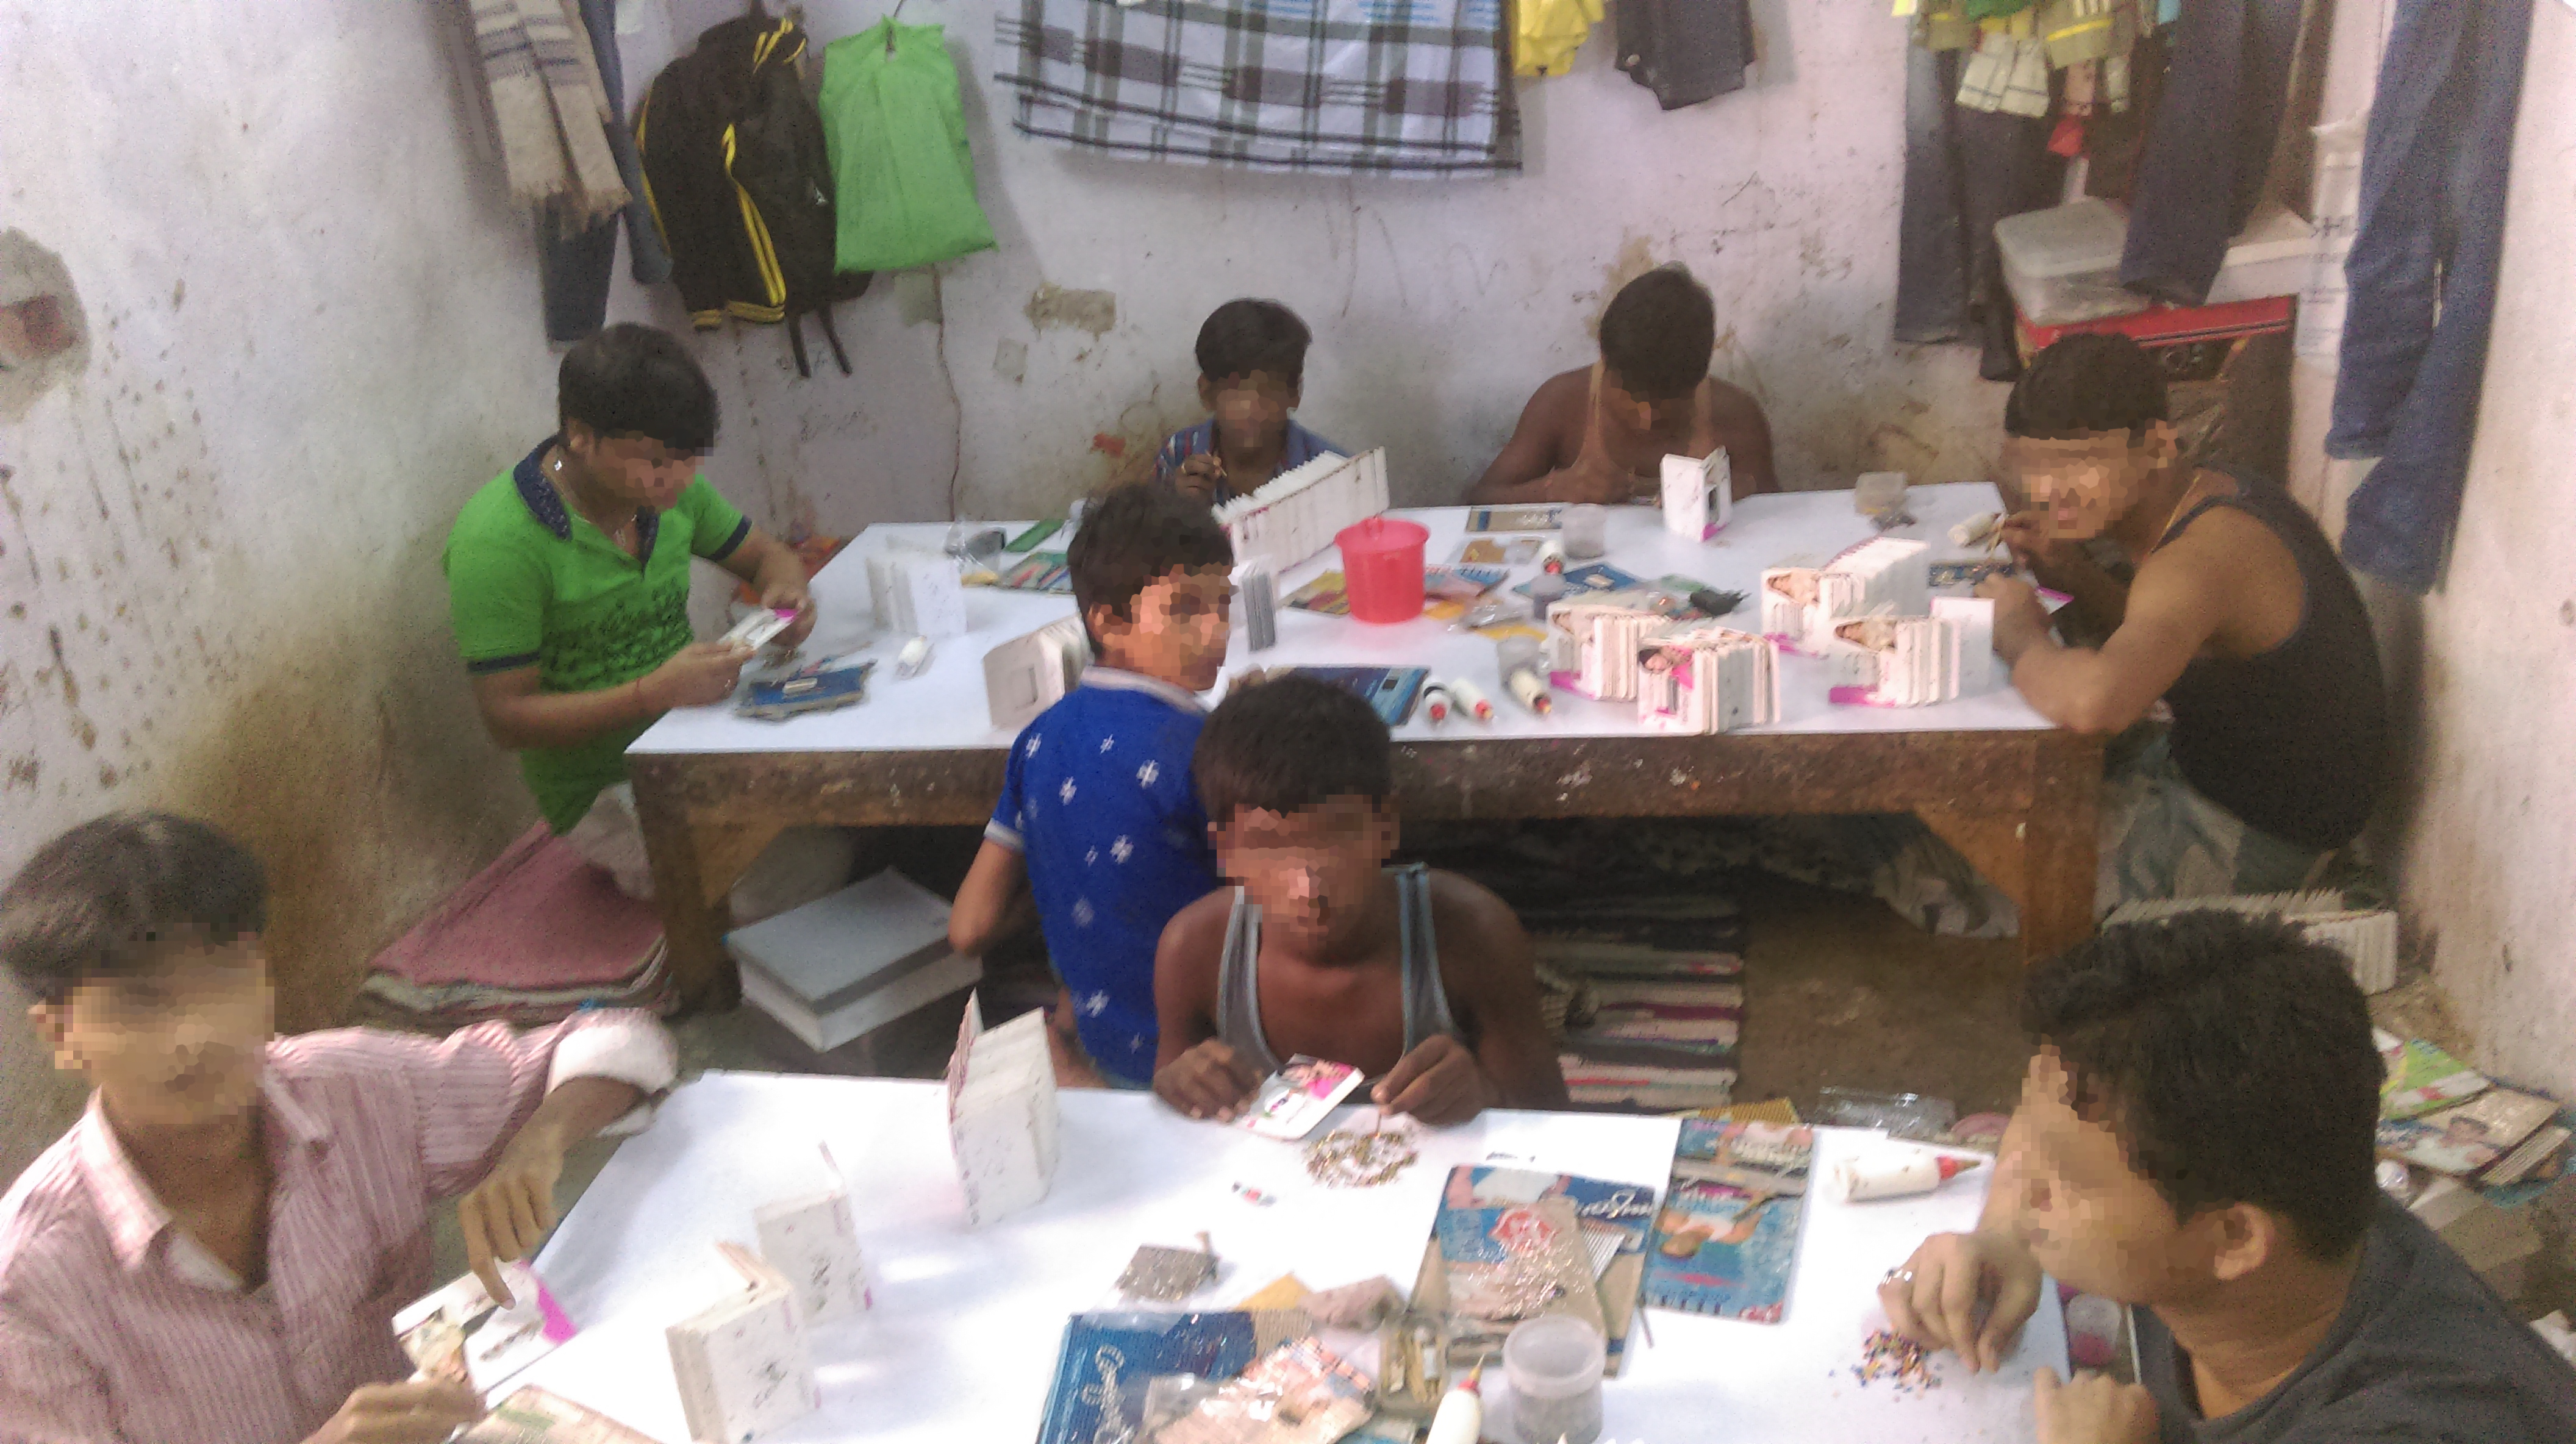 children at the bonded labor site